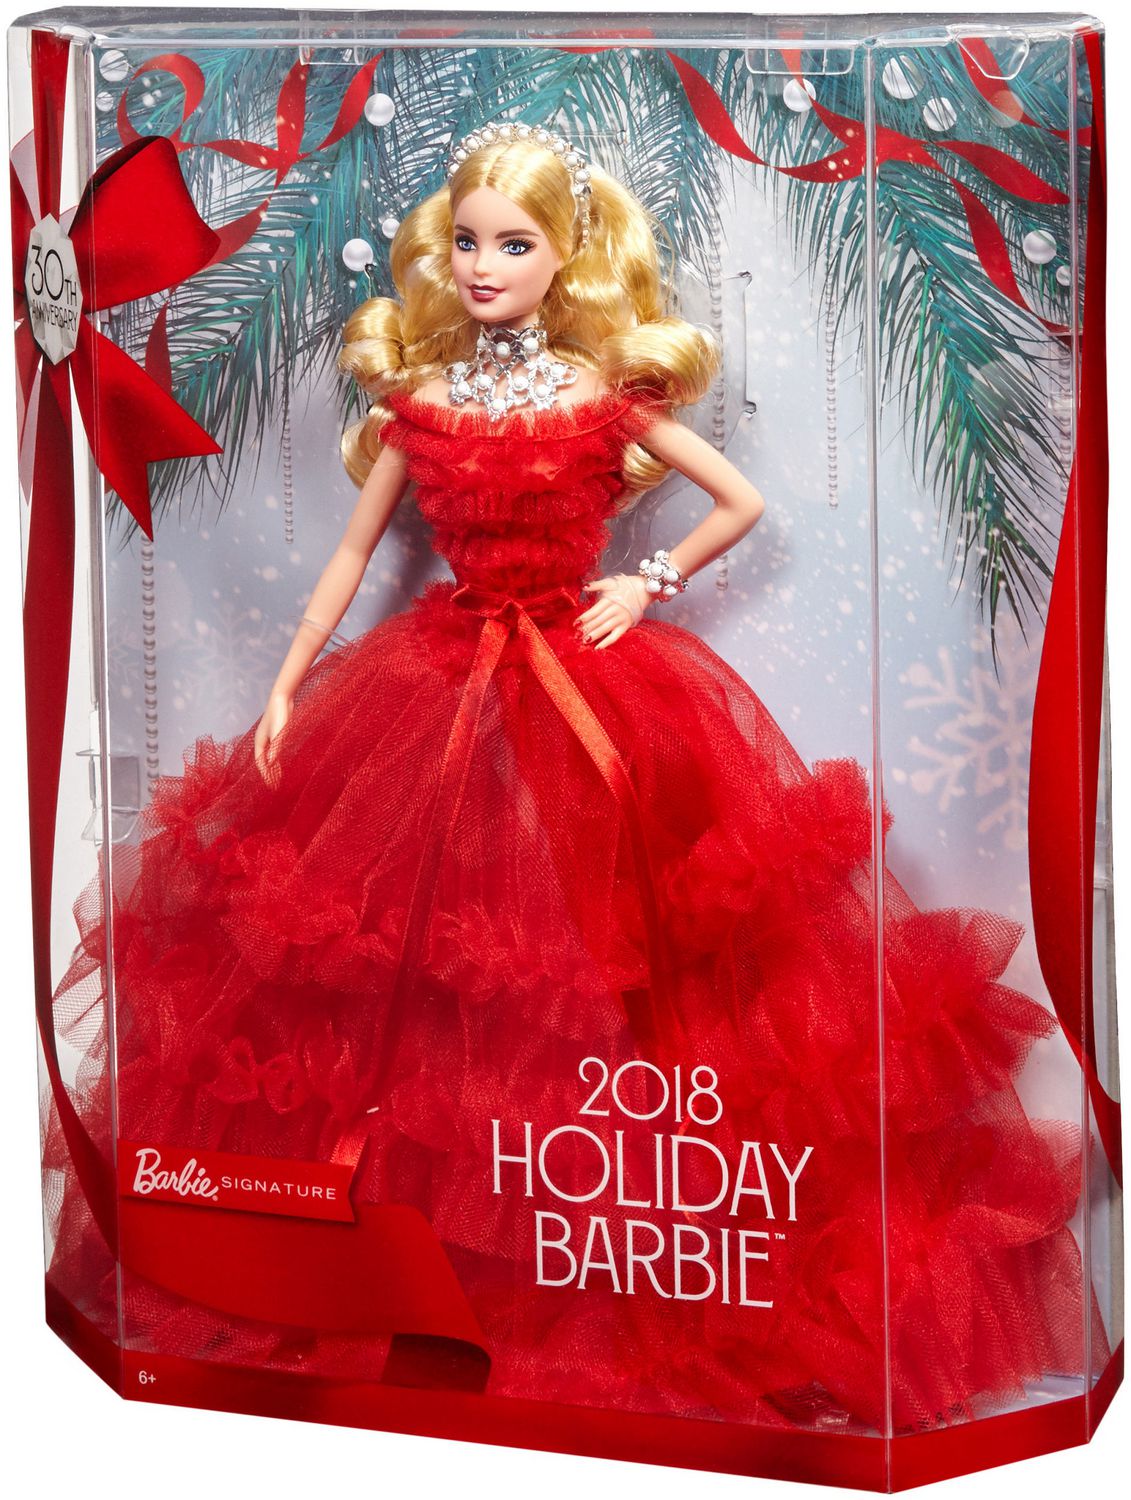 selling holiday barbies